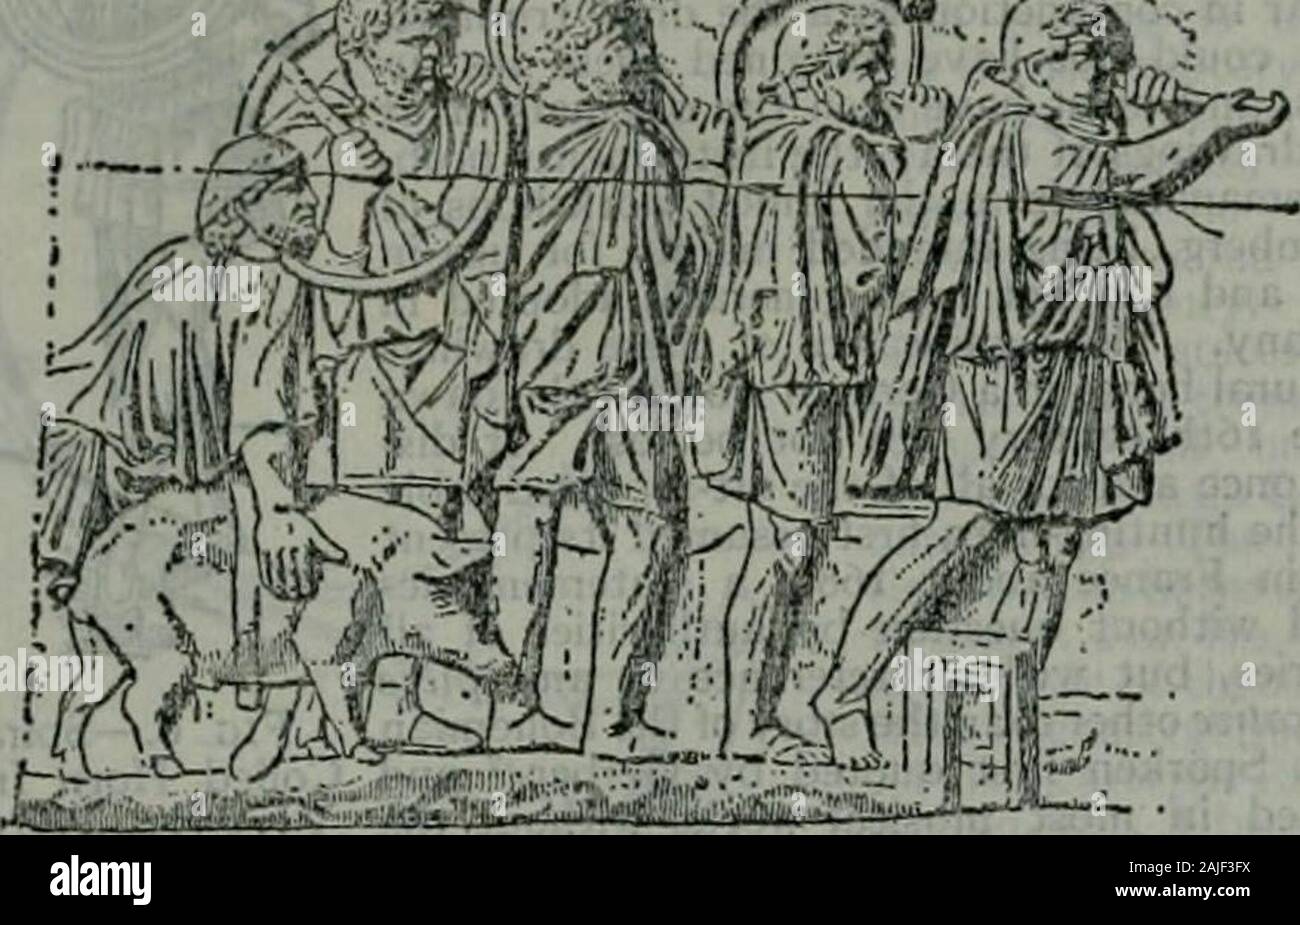 The encyclopædia britannica; a dictionary of arts, sciences, literature and general information . ichorius, Die Reliefs der Traians-iule(Beriin, 1896, &c.). * Ermanno Ferrero, LArc dAugustc .d Suse (Scgusio, 9-8 B.C.)(Turin, igor). See the mouthpiece on the Pompeian buccinas preserved in themuseum at Naples, reproduced in the article Buccina. The museumsof the conservatoires of Paris and Brussels and the Collection Krausin Florence possess facsimile? of these instruments; see VictorMahillon, Catalogue, vol. ii. p. 30. Cf also the pair of bronzeEtruscan cornua. No. 2734 in the depanment of Gree Stock Photo